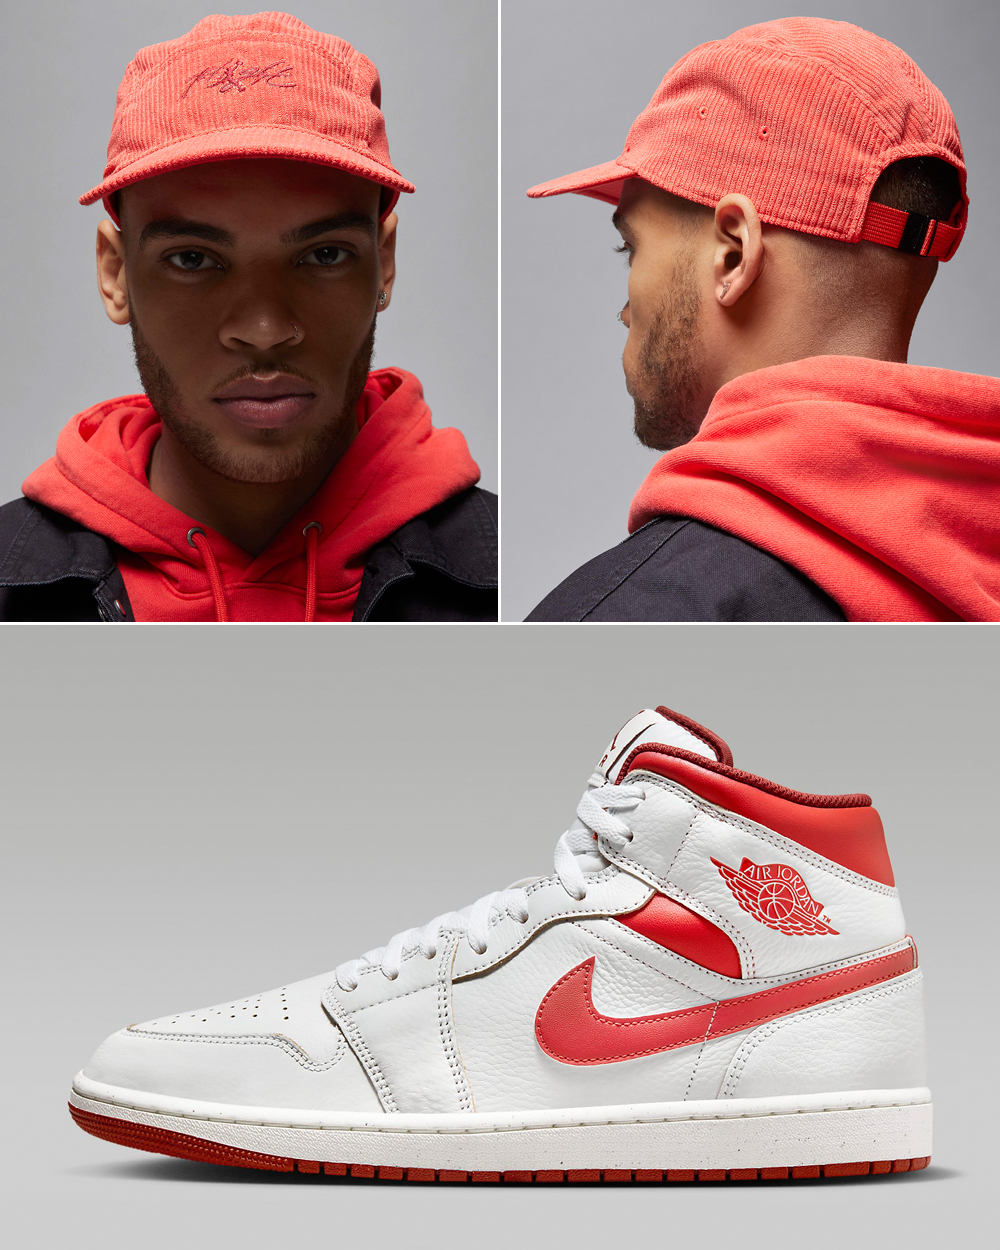 Air-Jordan-1-Mid-SE-White-Dune-Red-Lobster-Cap-Matching-Outfit